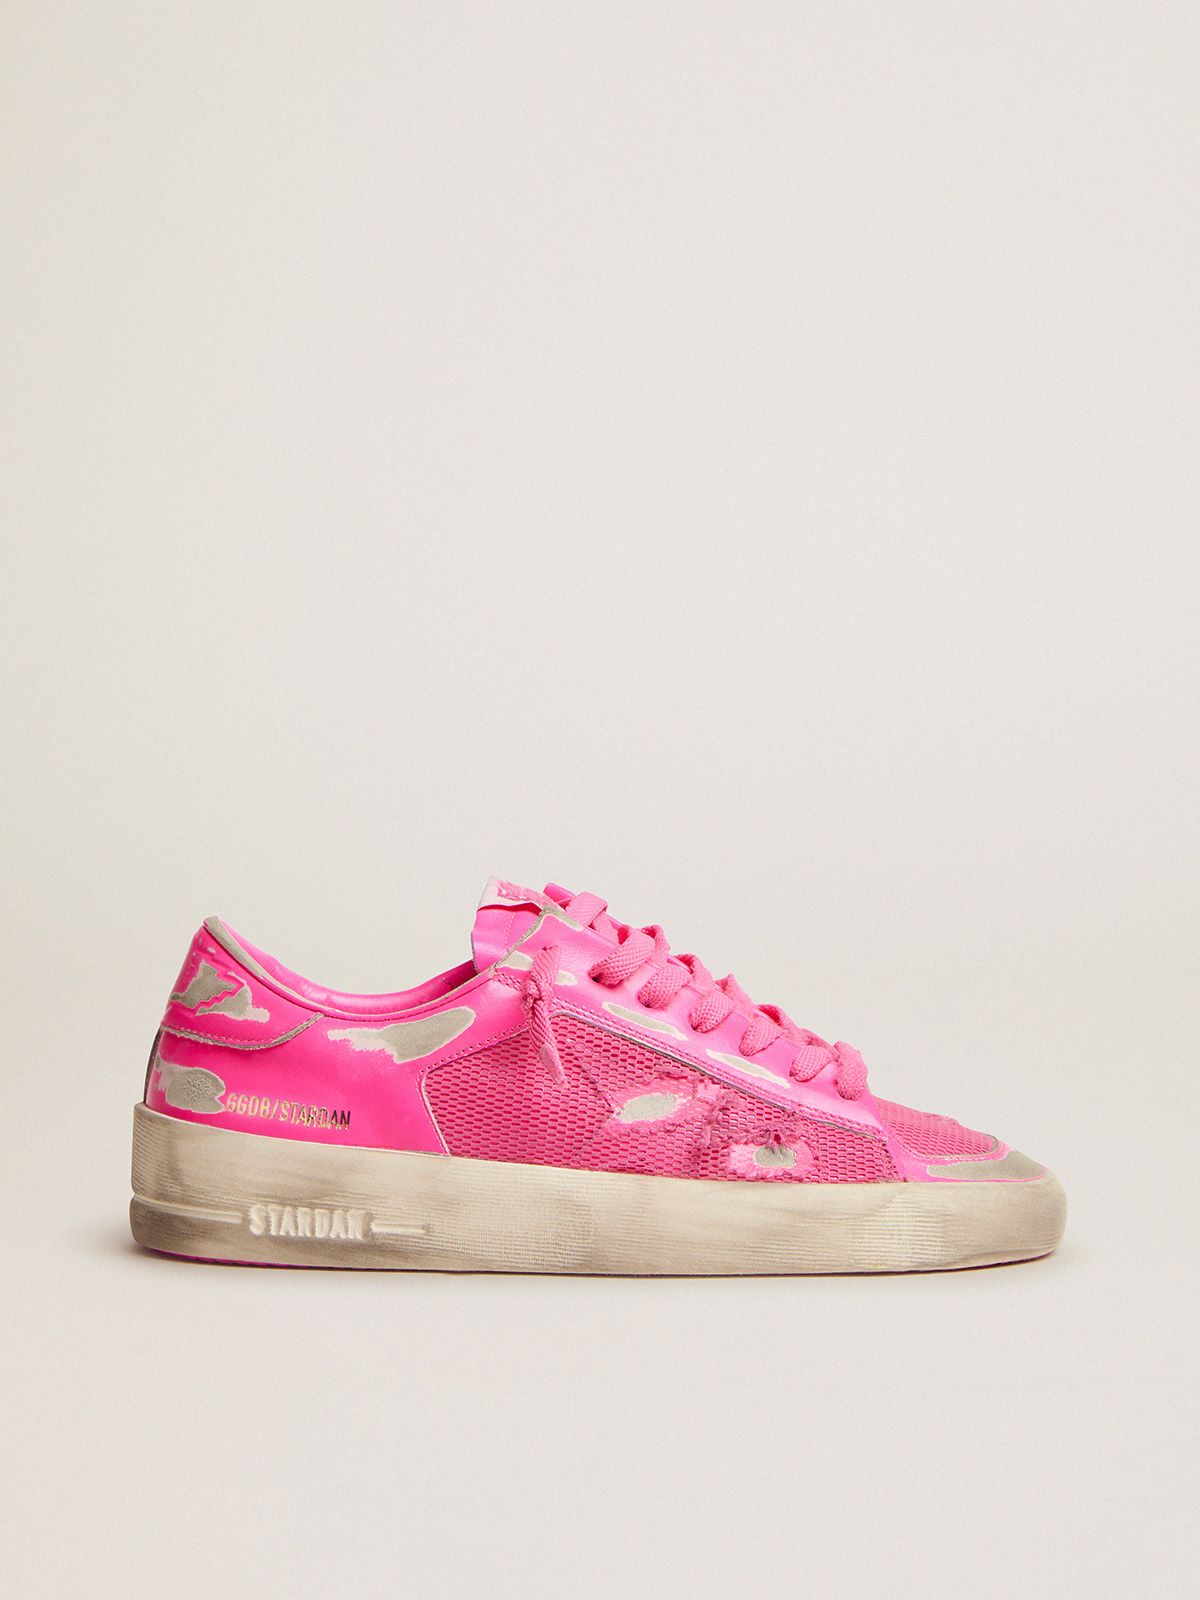 Stardan sneakers in fluorescent pink leather and mesh | 